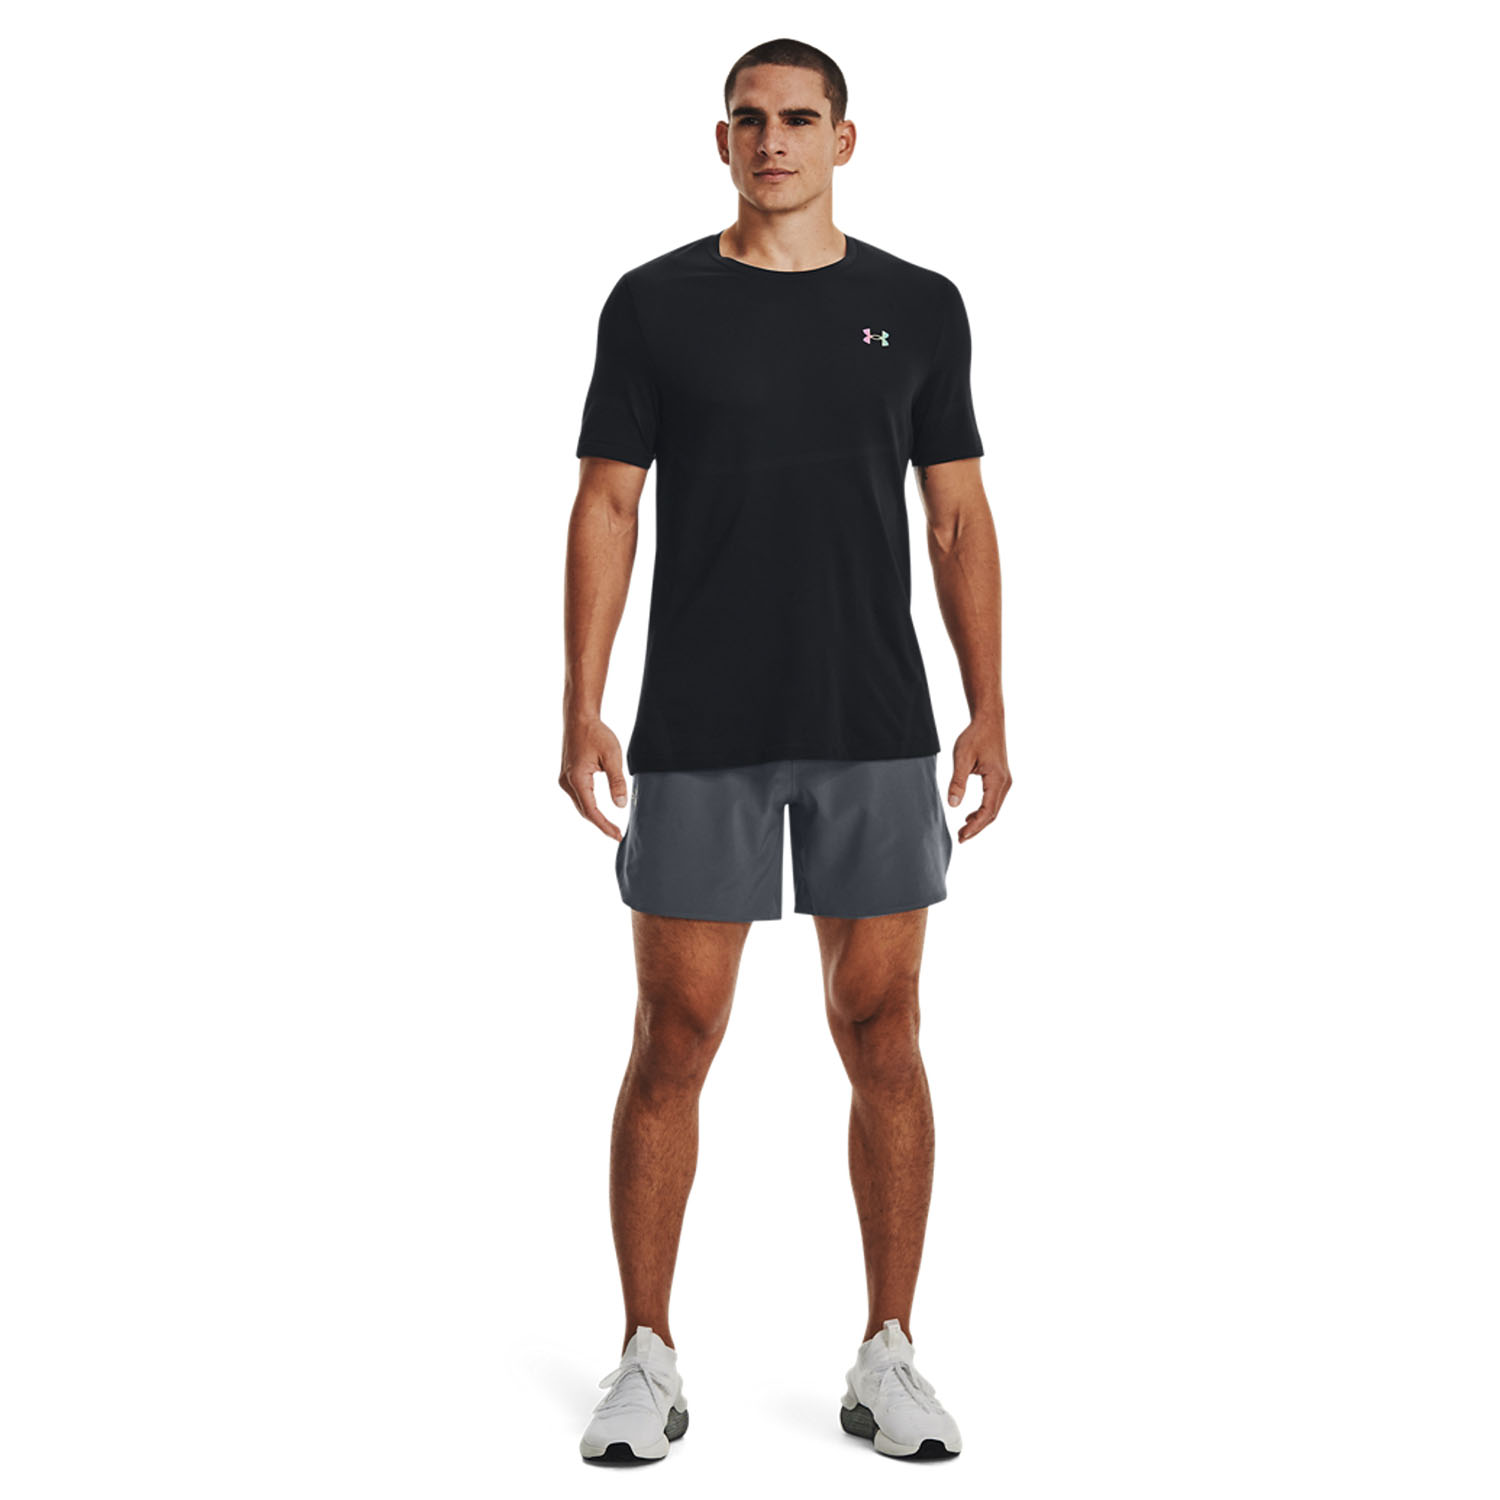 Under Armour Peak Woven 6in Shorts - Pitch Gray/Black